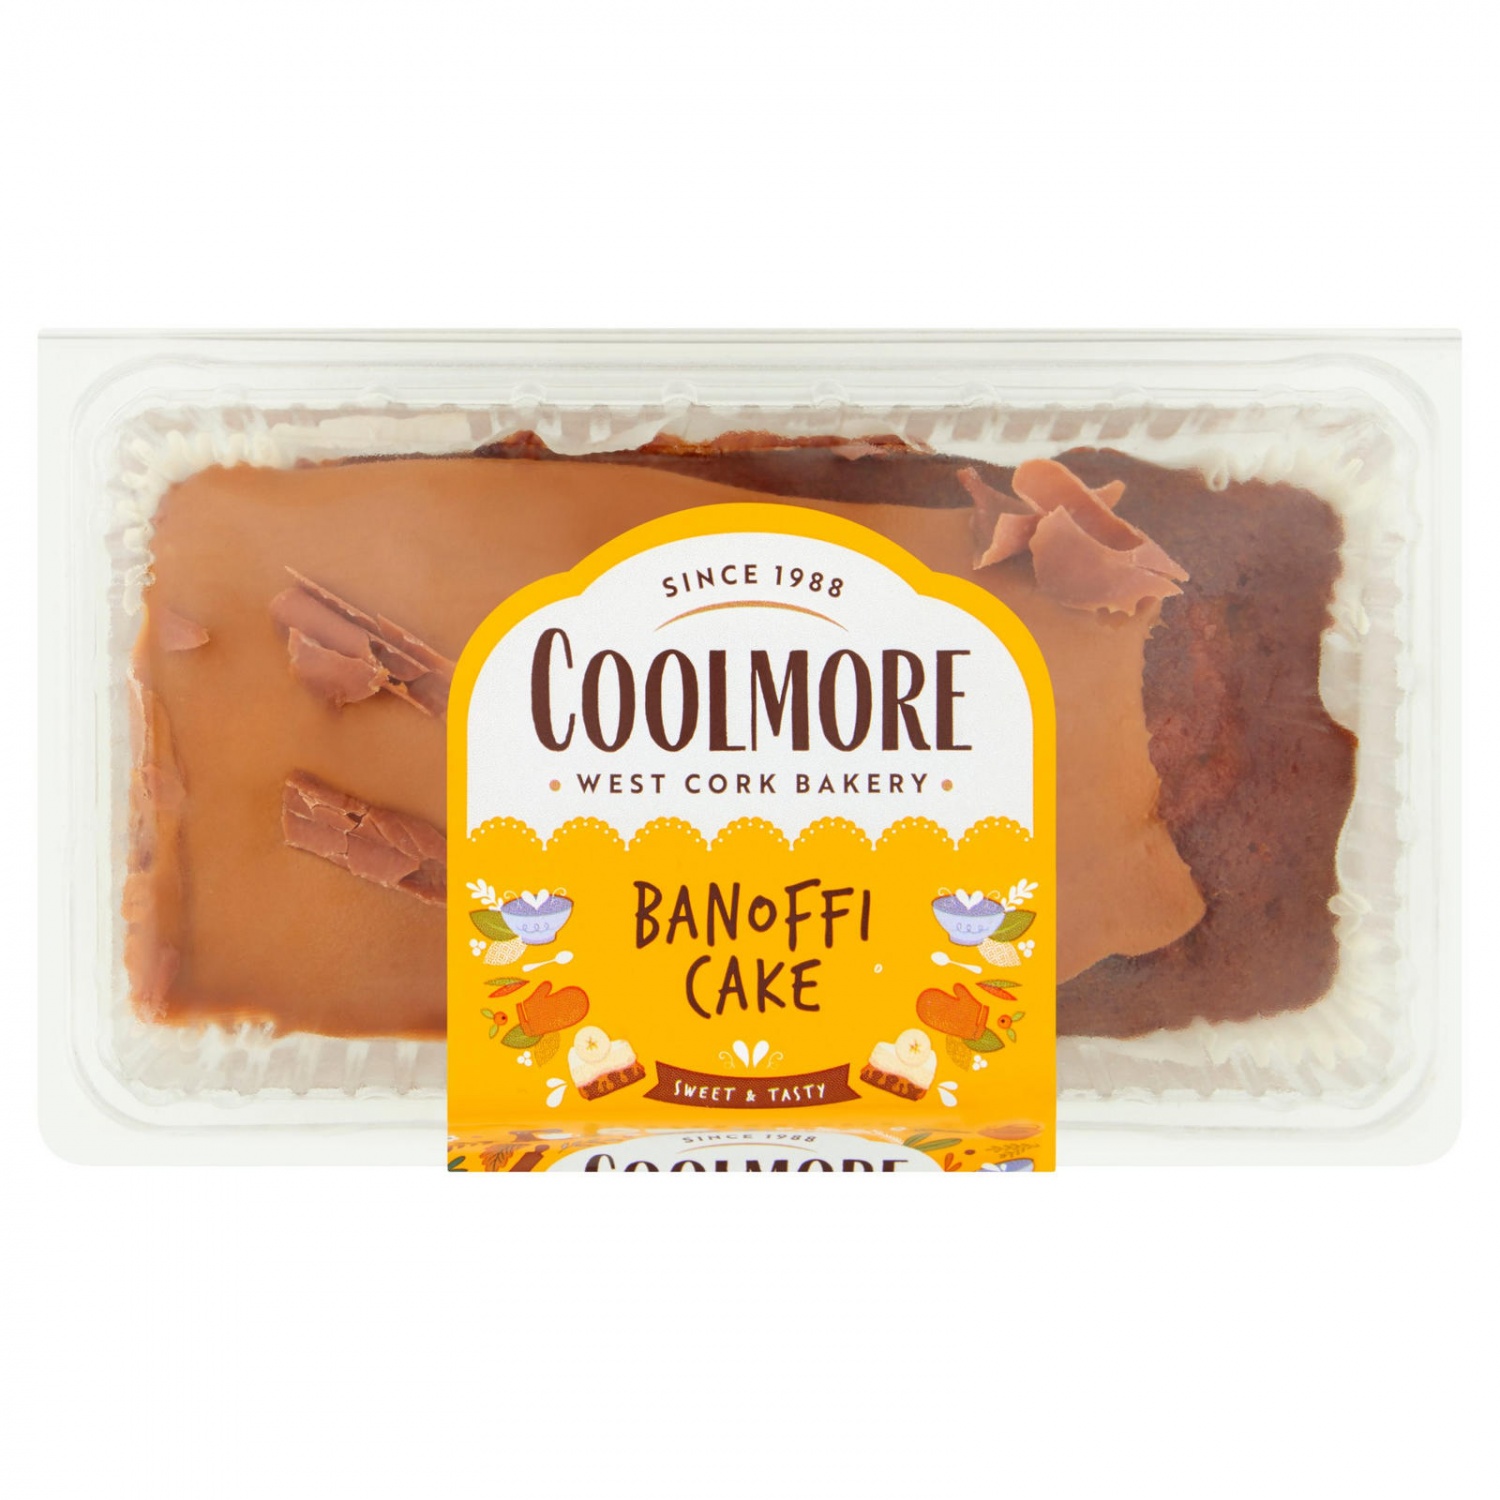 Coolmore Banoffi Cake 400g (Dec 23) RRP 2.49 CLEARANCE XL 1.00